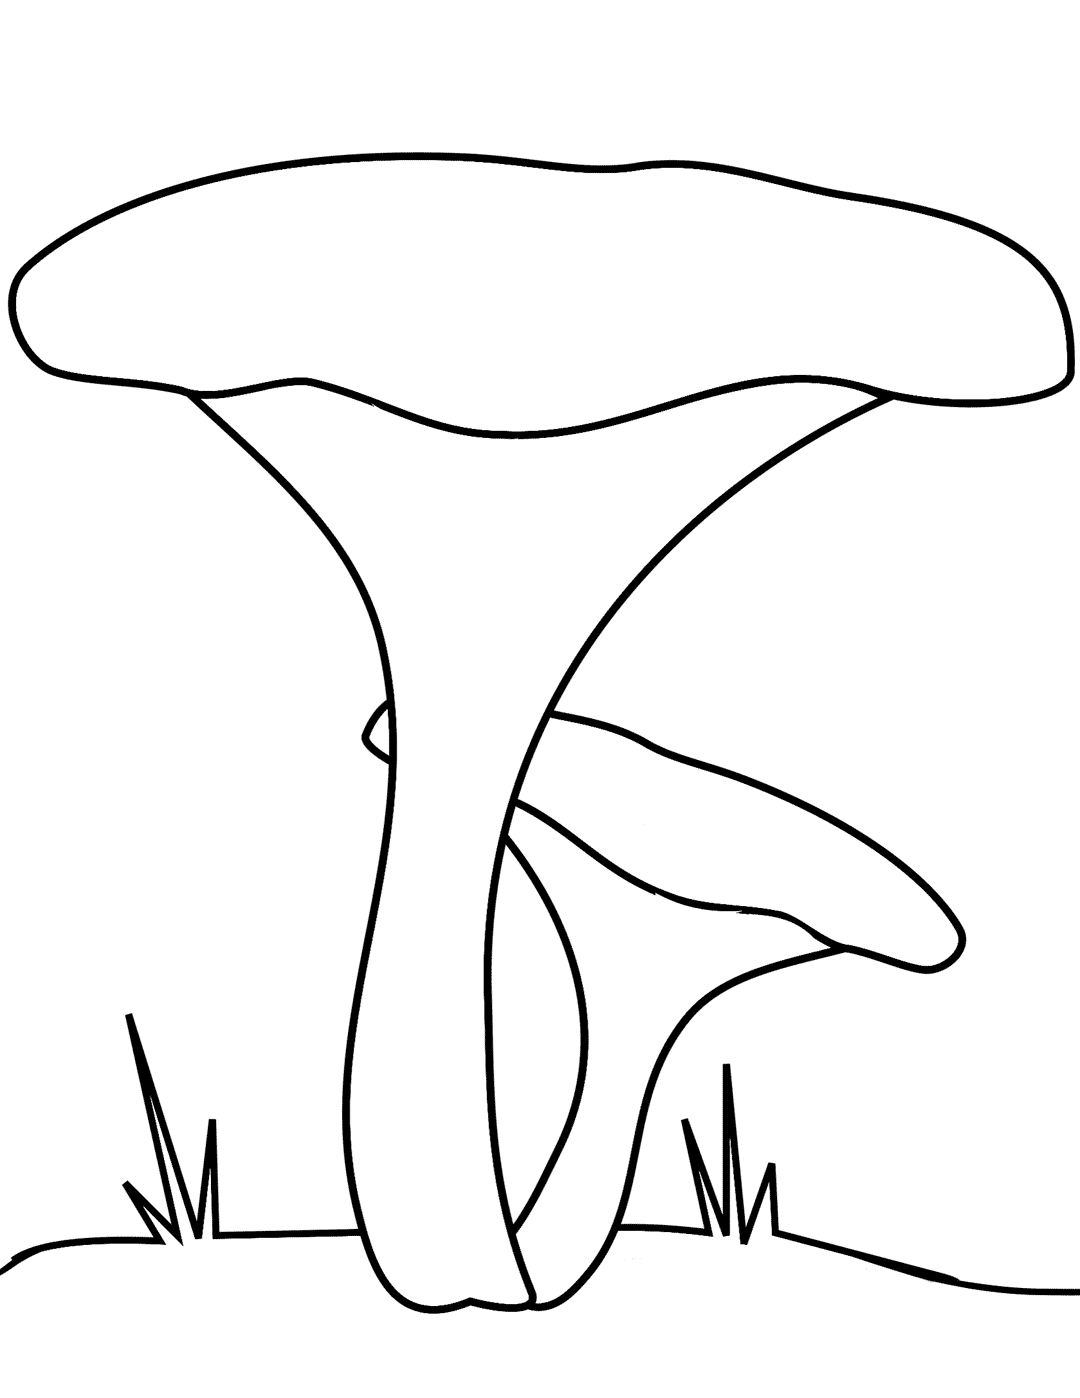 Mushroom Coloring Pages for Adults Printable 113